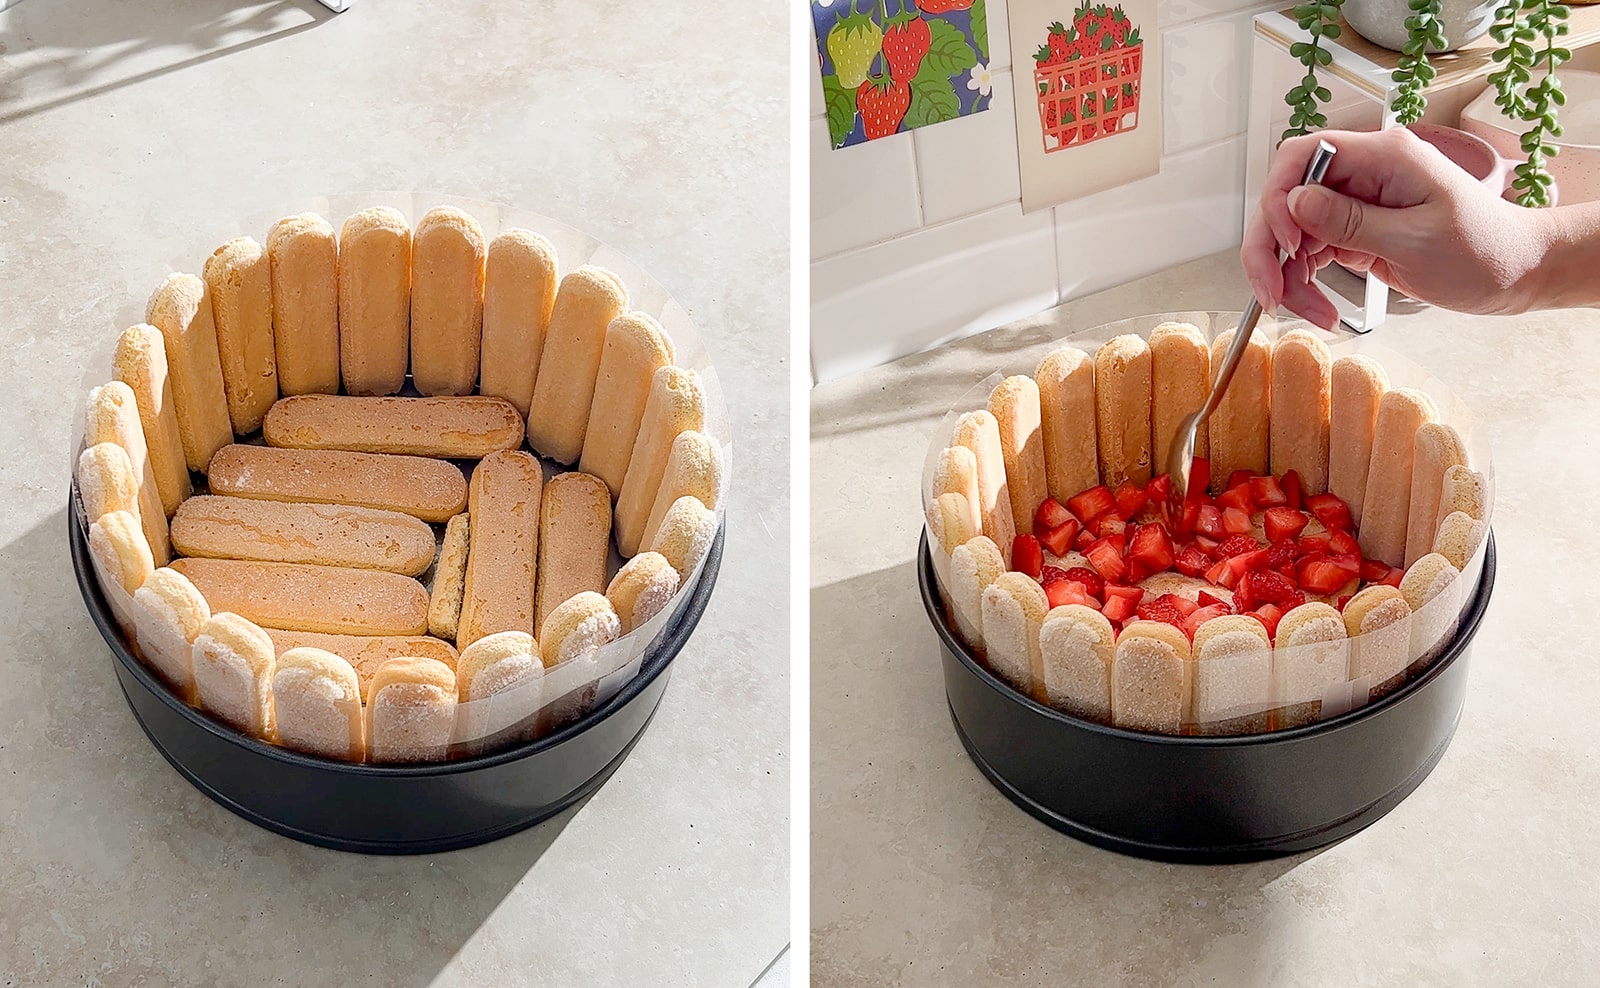 Left to right: ladyfingers arranged around the sides and bottom of a pan, arranging a layer of diced strawberries at the bottom of a pan.